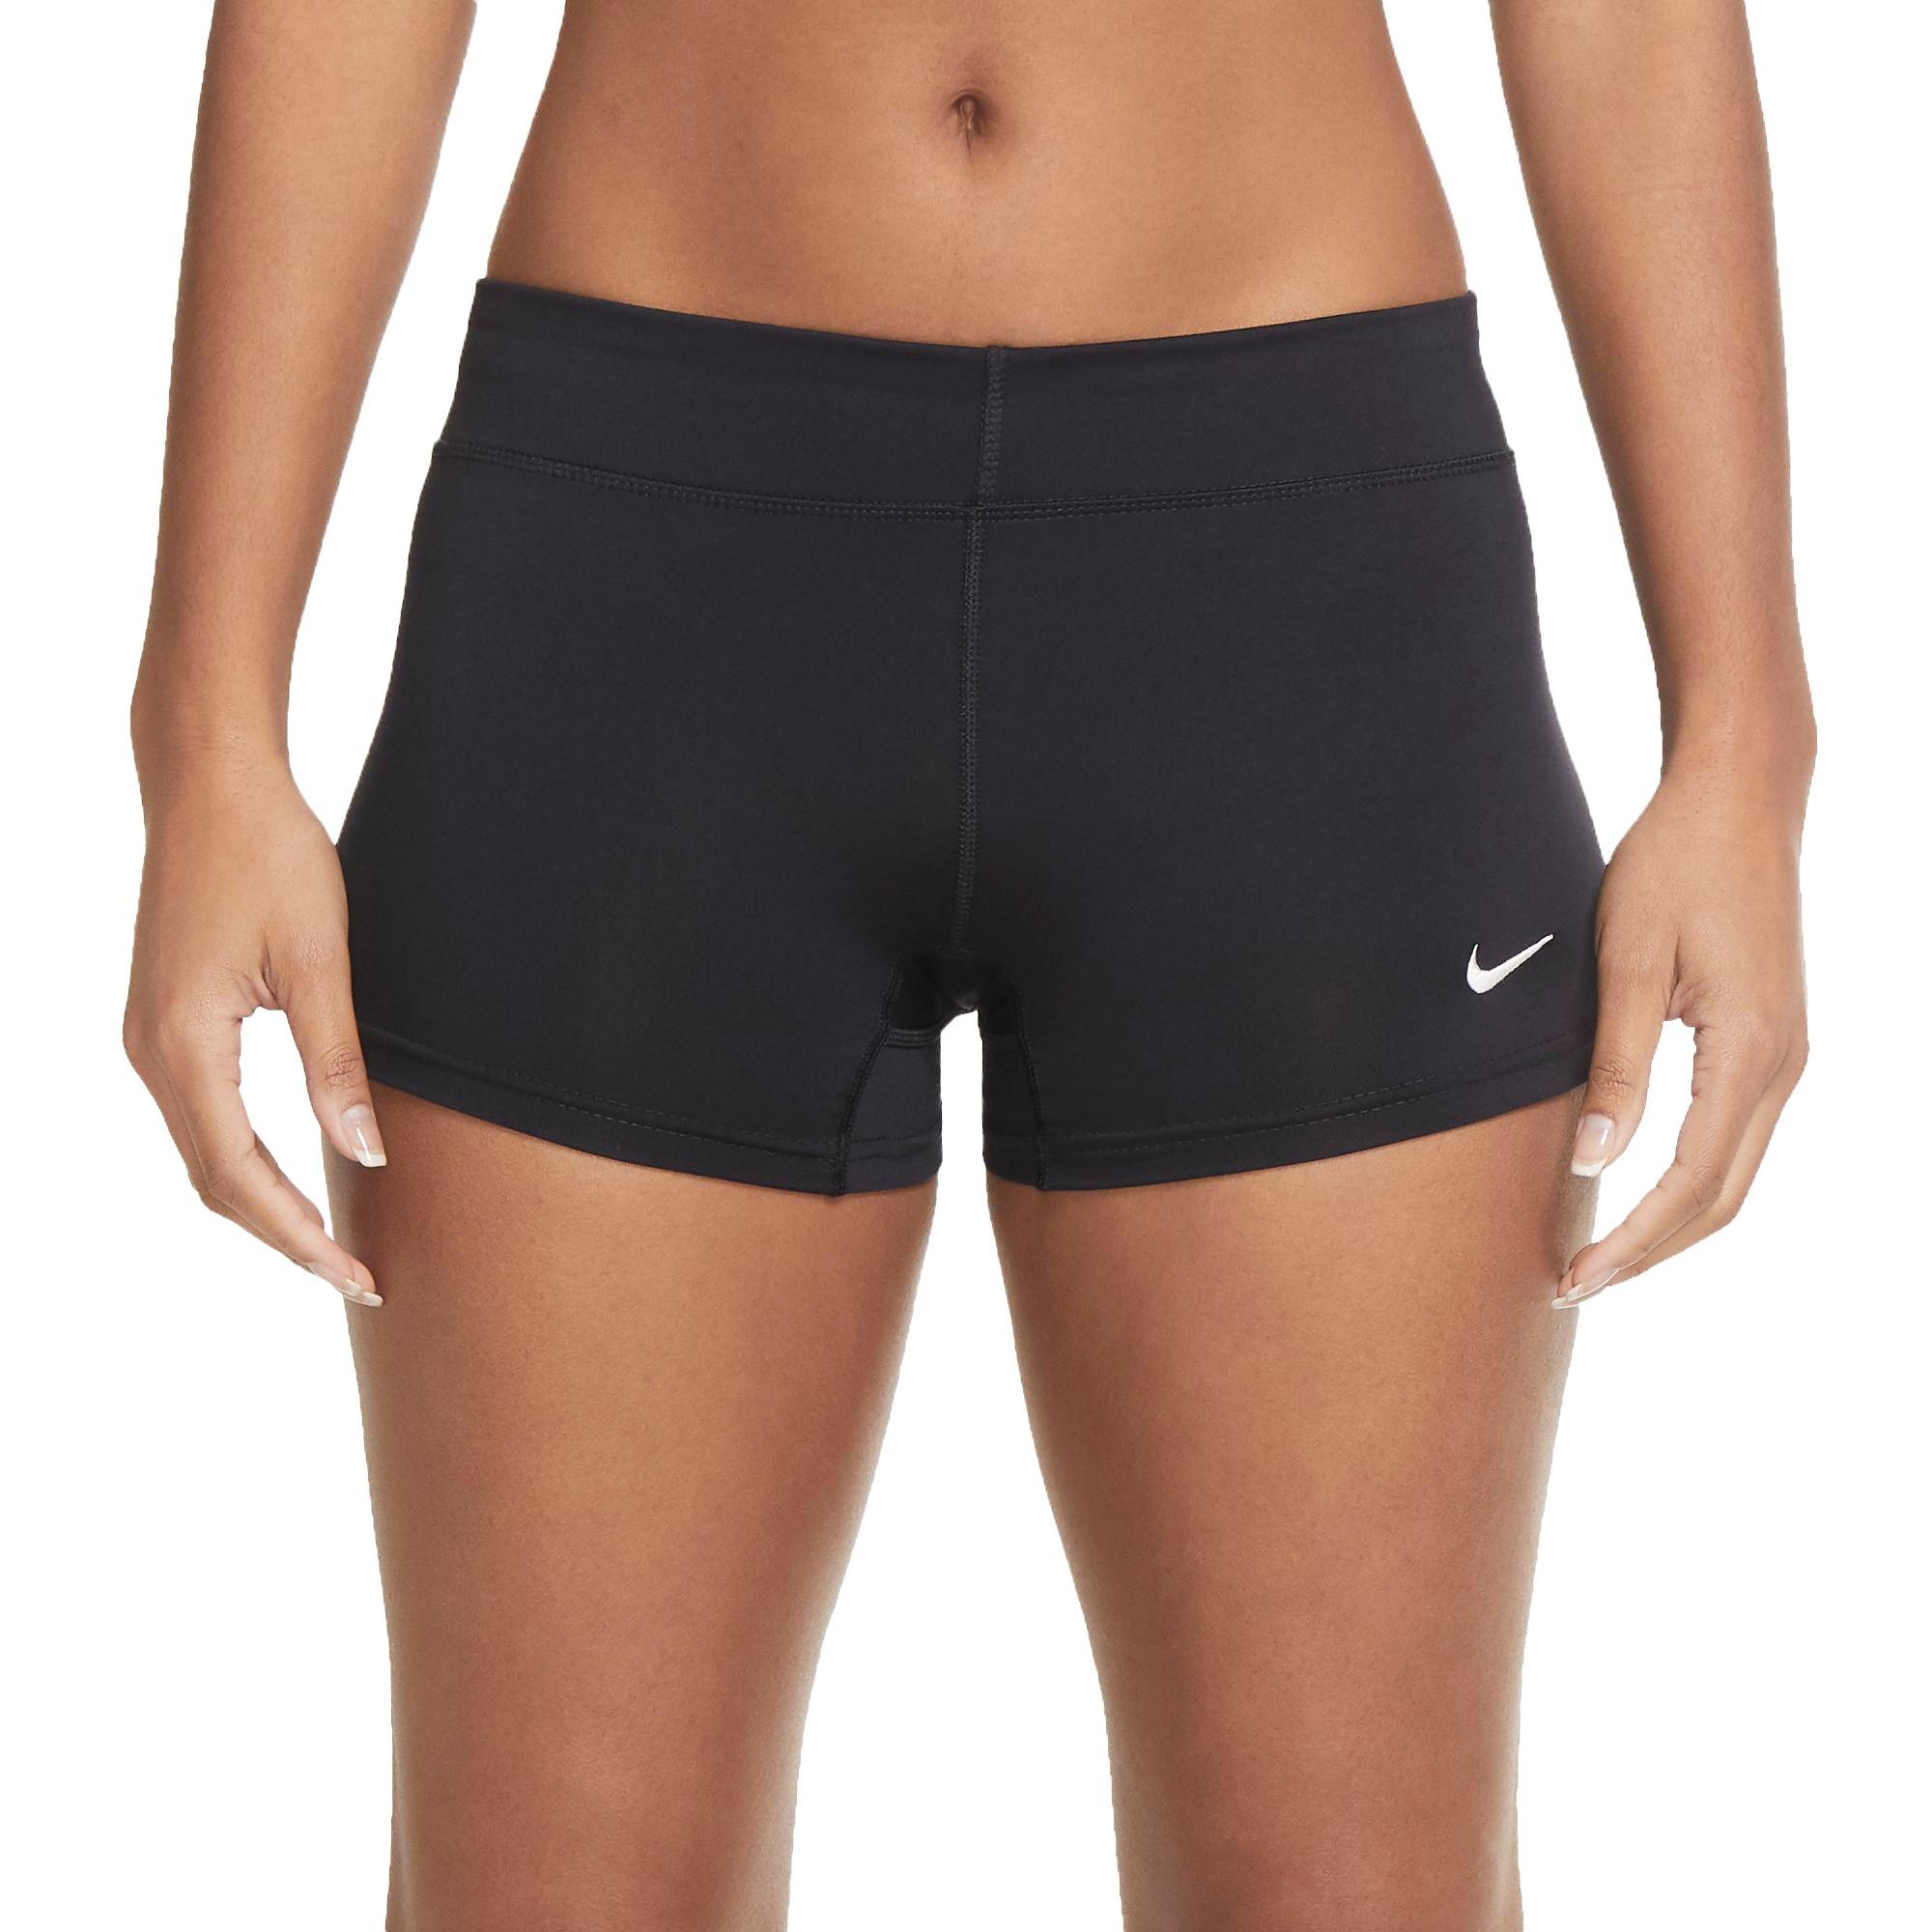 Women's Performance Game Volleyball Shorts